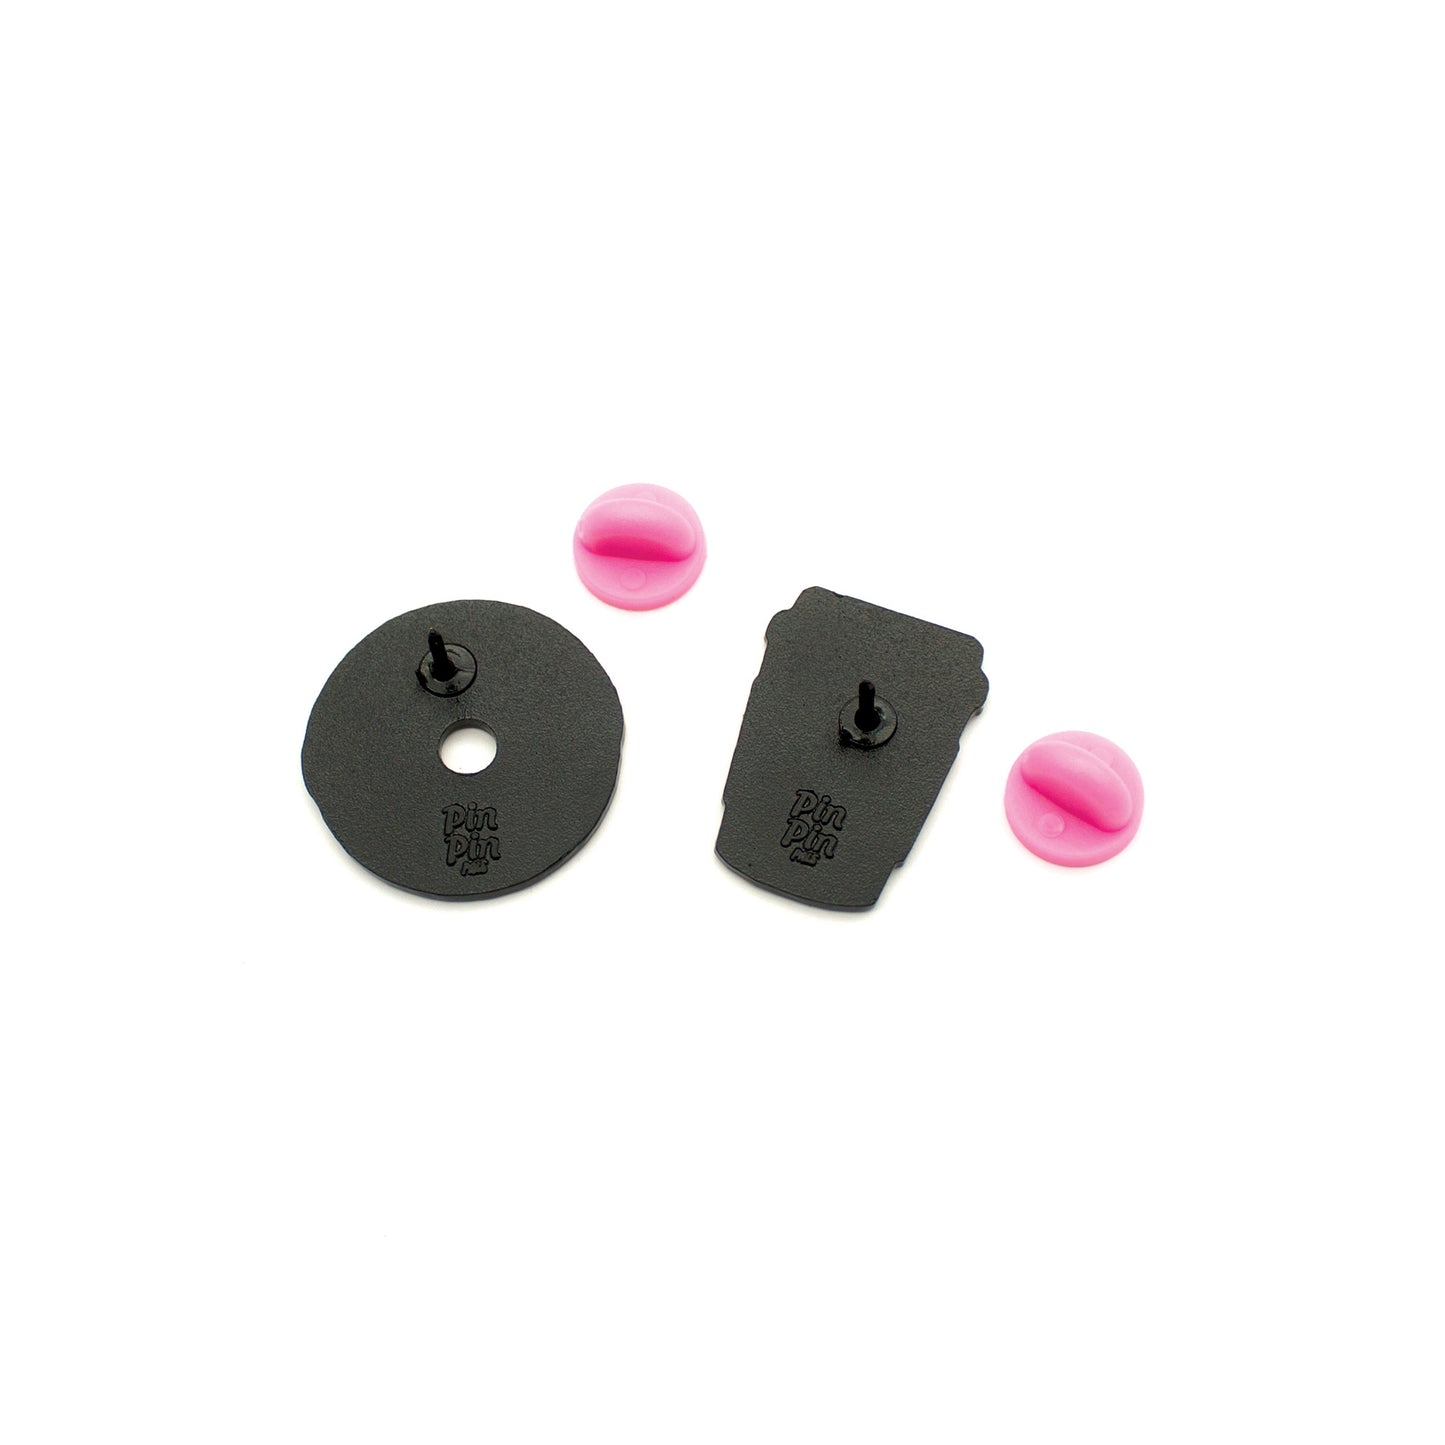 Backs of Donut and Coffee enamel pins with pink rubber backings